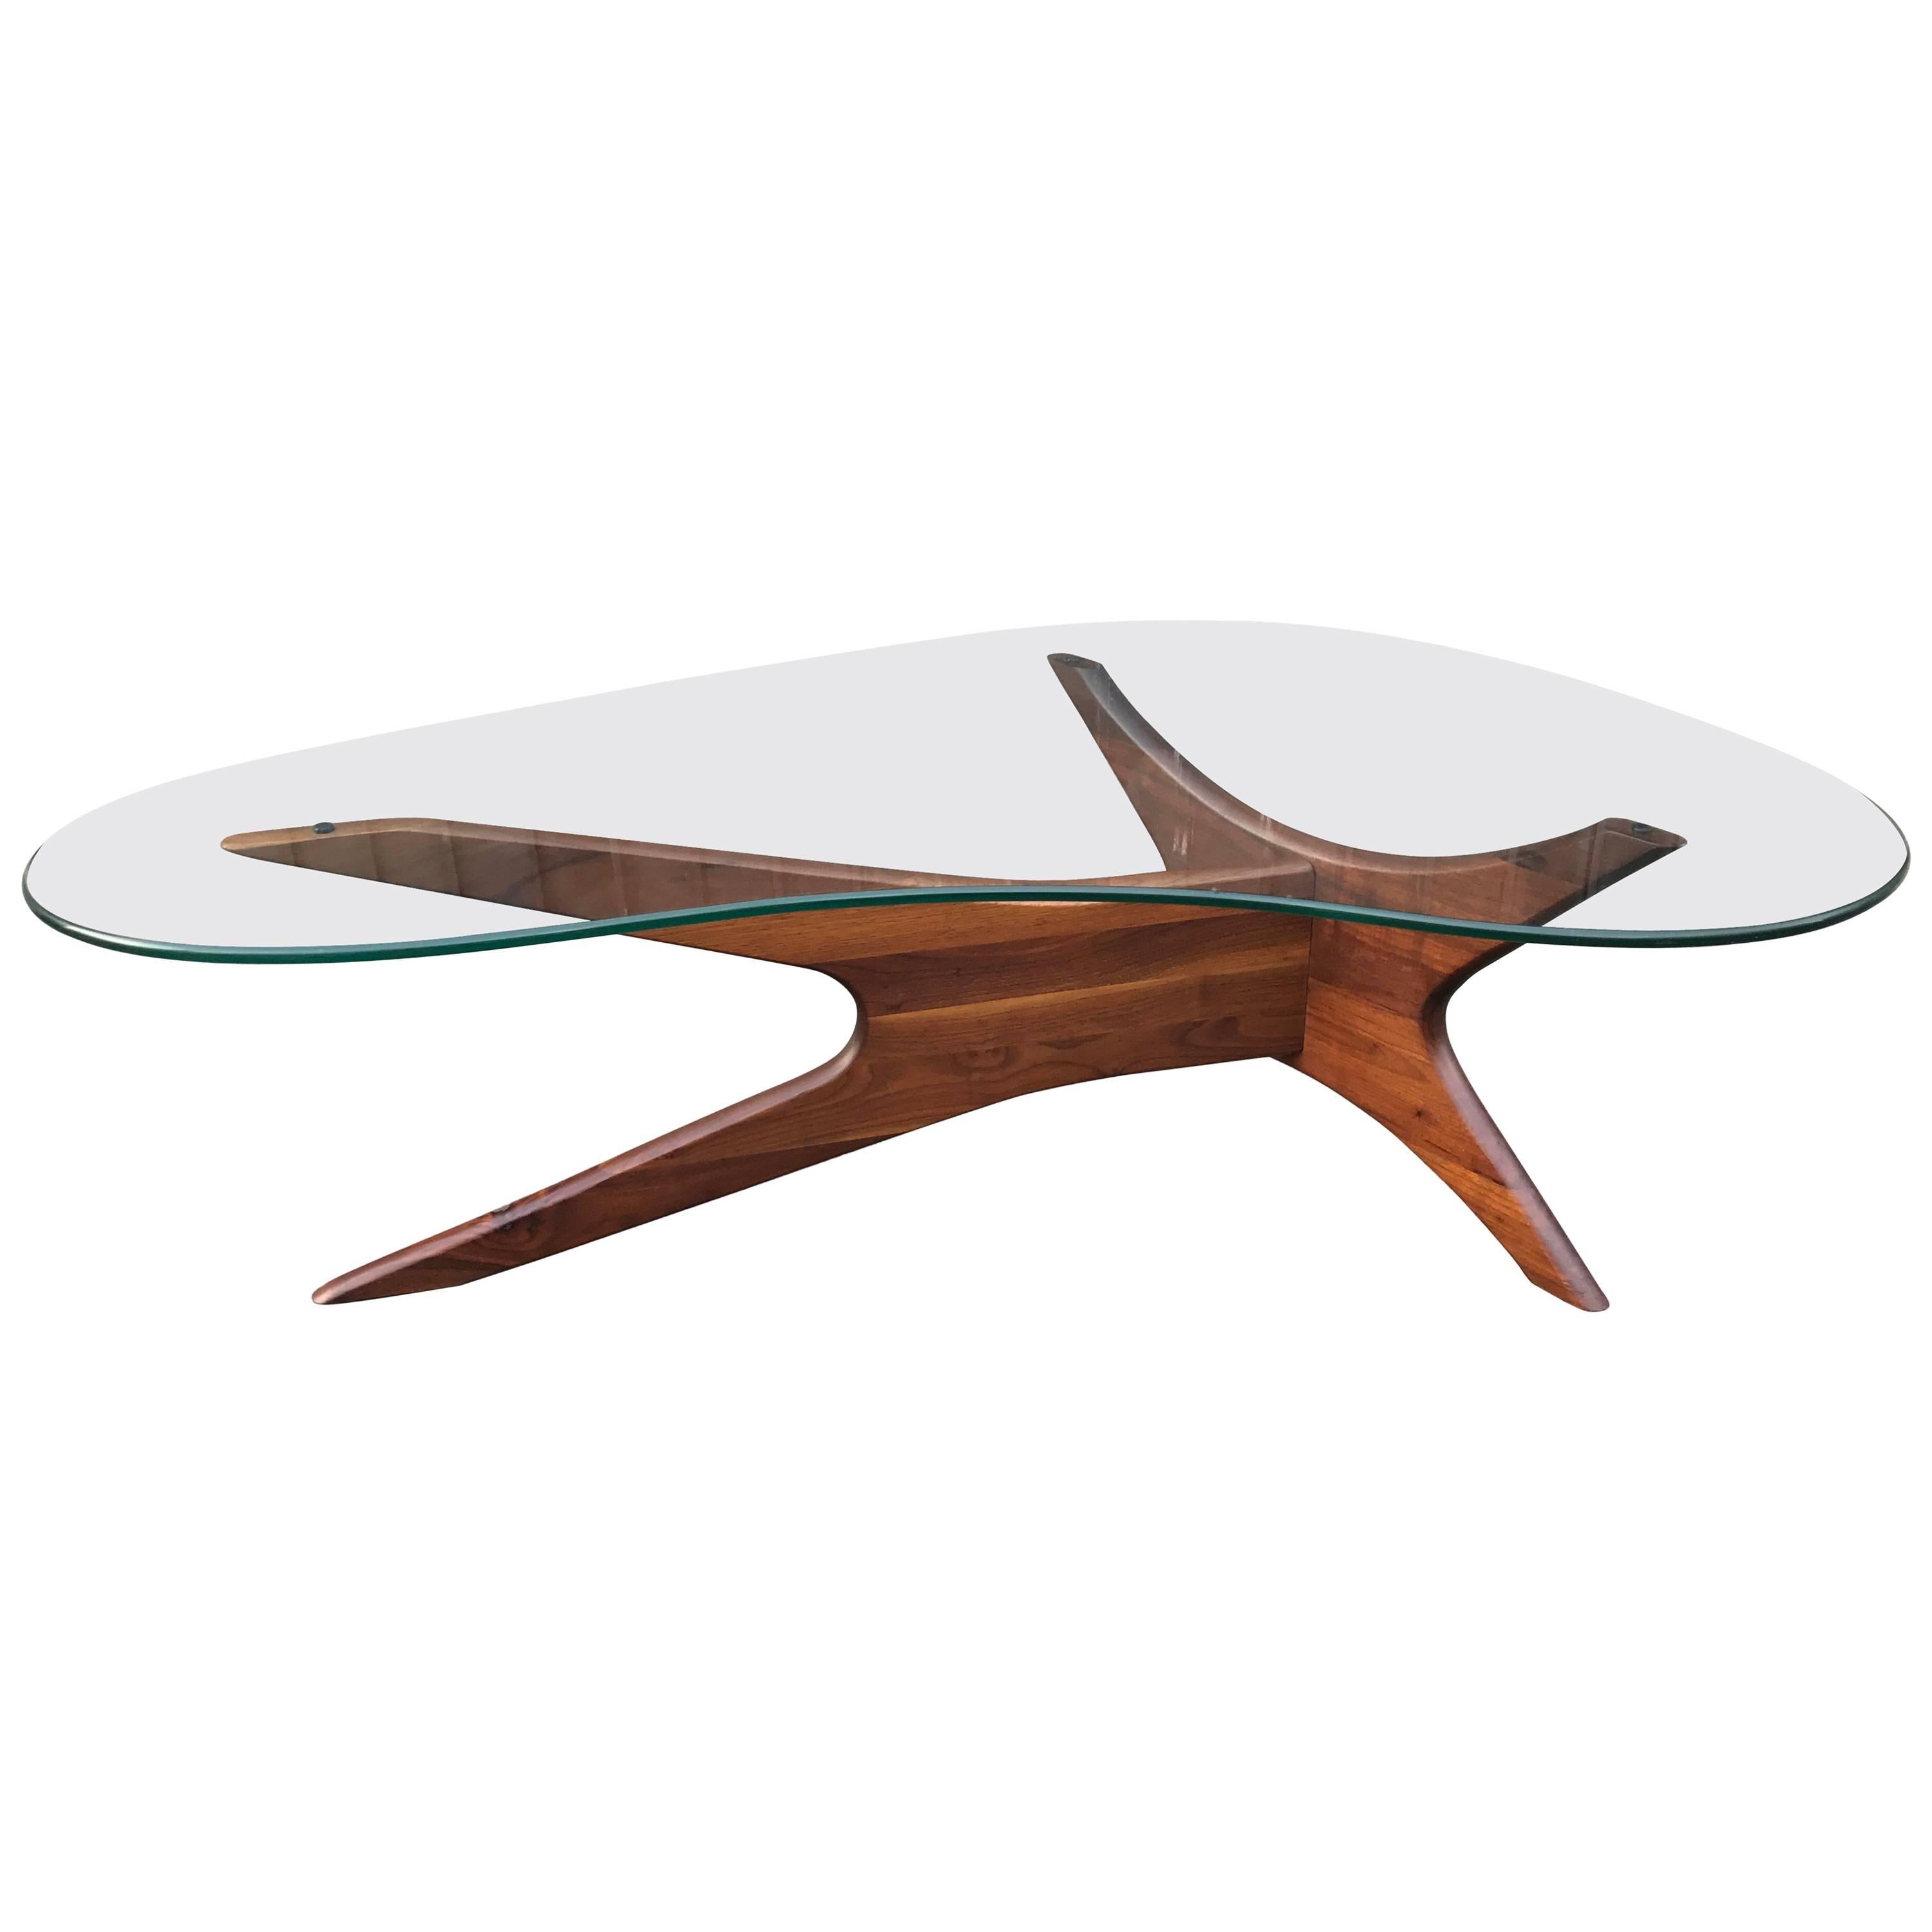 Adrian Pearsall Biomorphic Coffee Table